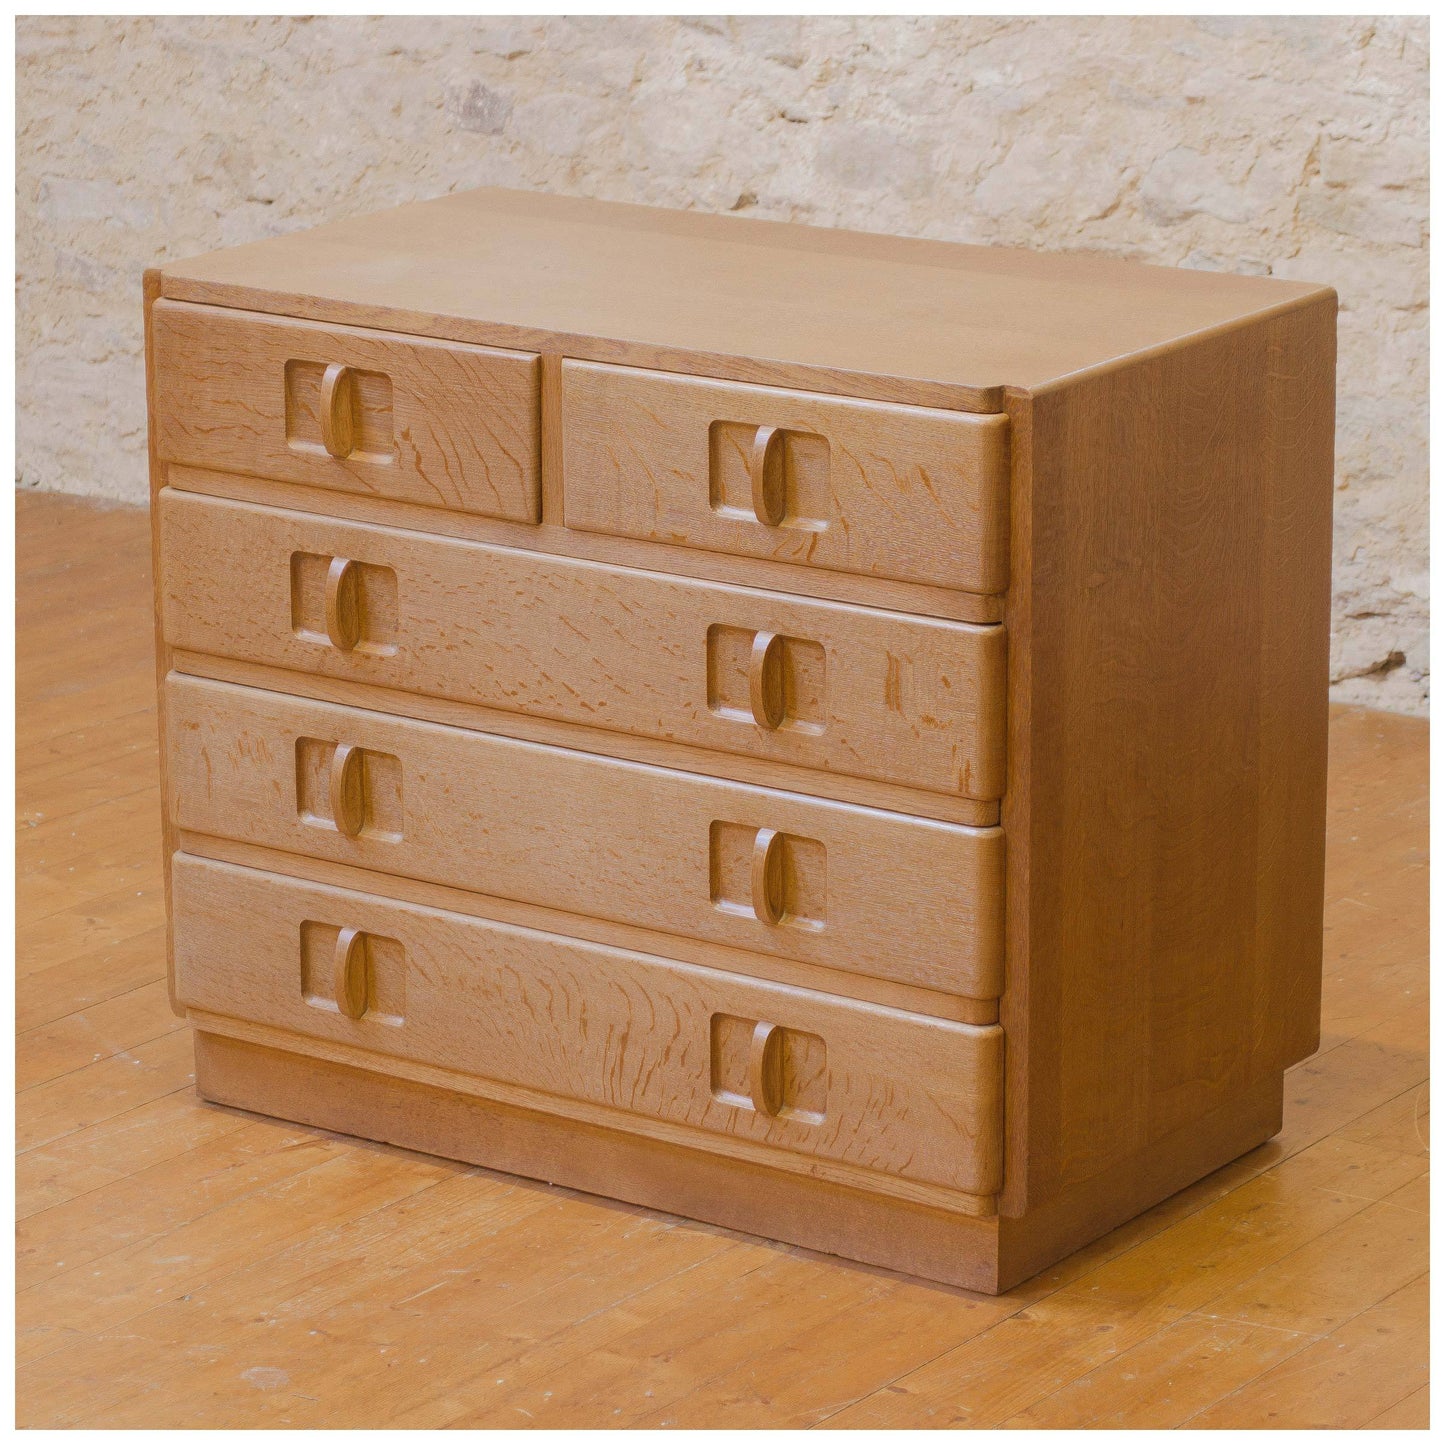 Gordon Russell Arts & Crafts Cotswold School 'Ilmington' Oak Chest of Drawers